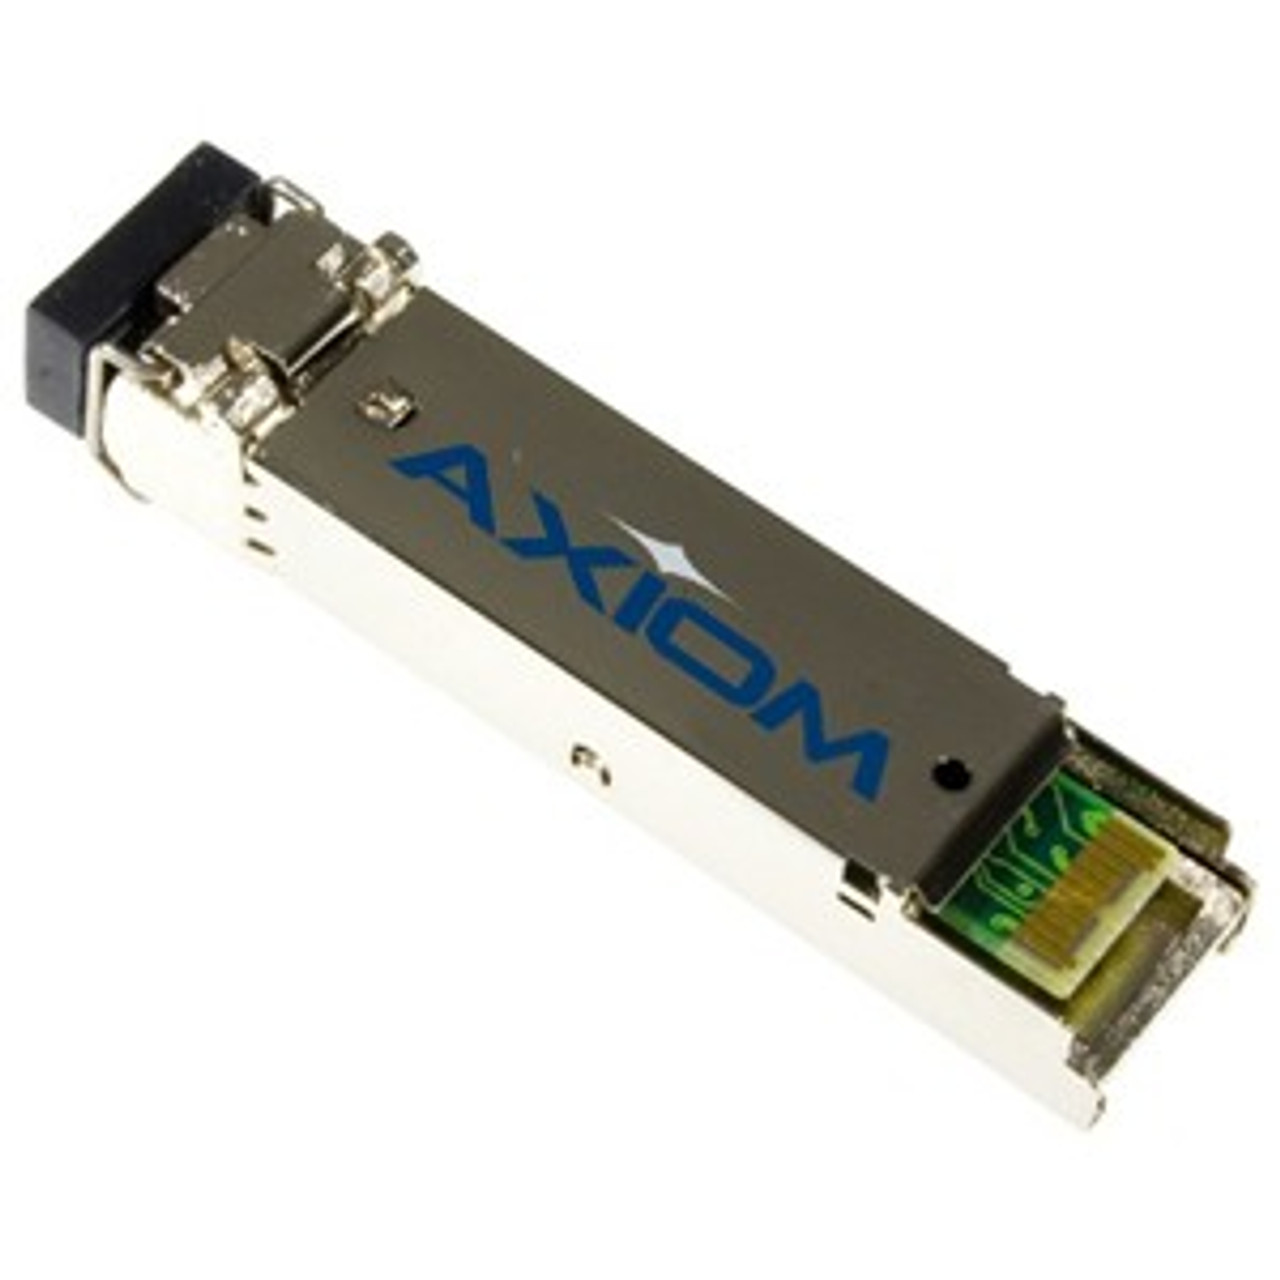 DGS-711-AX Axiom 1Gbps 1000Base-T Copper 100m RJ-45 Connector GBIC Transceiver Module for D-Link Compatible